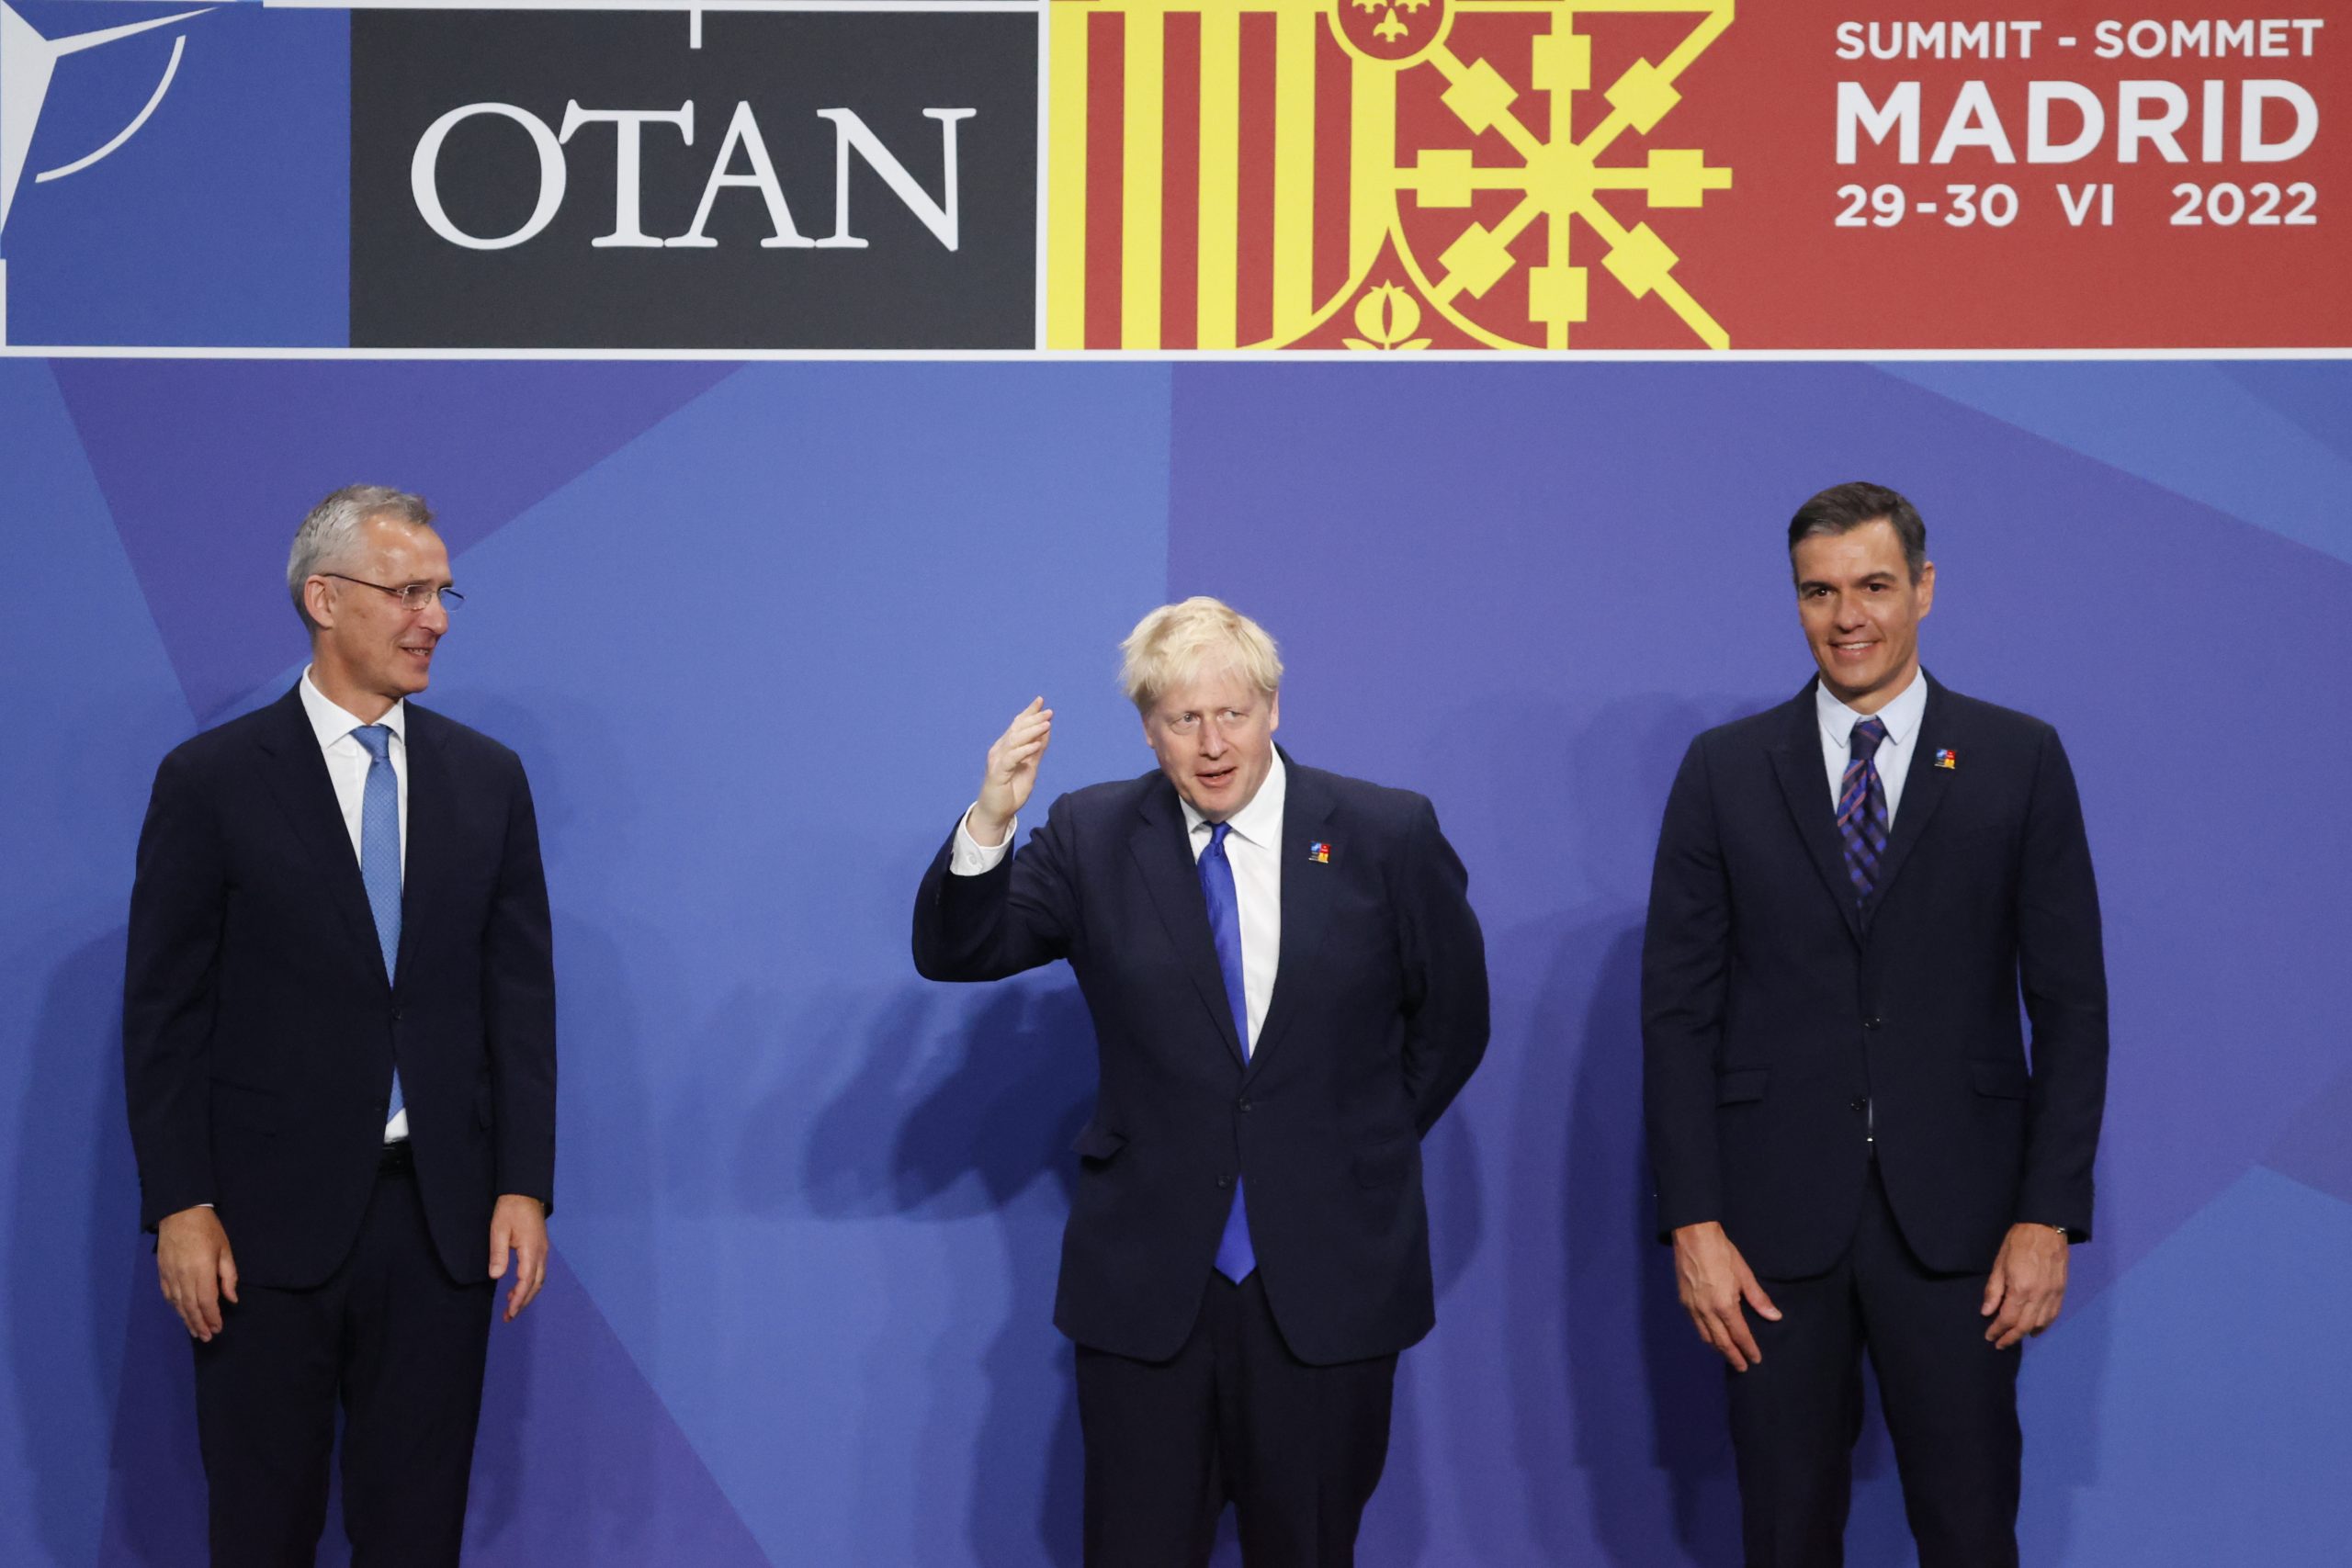 epa10040422 NATO Secretary General, Jens Stoltenberg (L), and Spanish Prime Minister, Pedro Sanchez (R), pose next to British Prime Minister, Boris Johnson, during the first day of the NATO Summit at IFEMA Convention Center, in Madrid, Spain, 29 June 2022. Heads of State and Government of NATO's member countries and key partners are gathering in Madrid from 29 to 30 June to discuss security concerns like Russia's invasion of Ukraine and other challenges. Spain is hosting 2022 NATO Summit coinciding with the 40th anniversary of its accession to NATO.  EPA/Brais Lorenzo